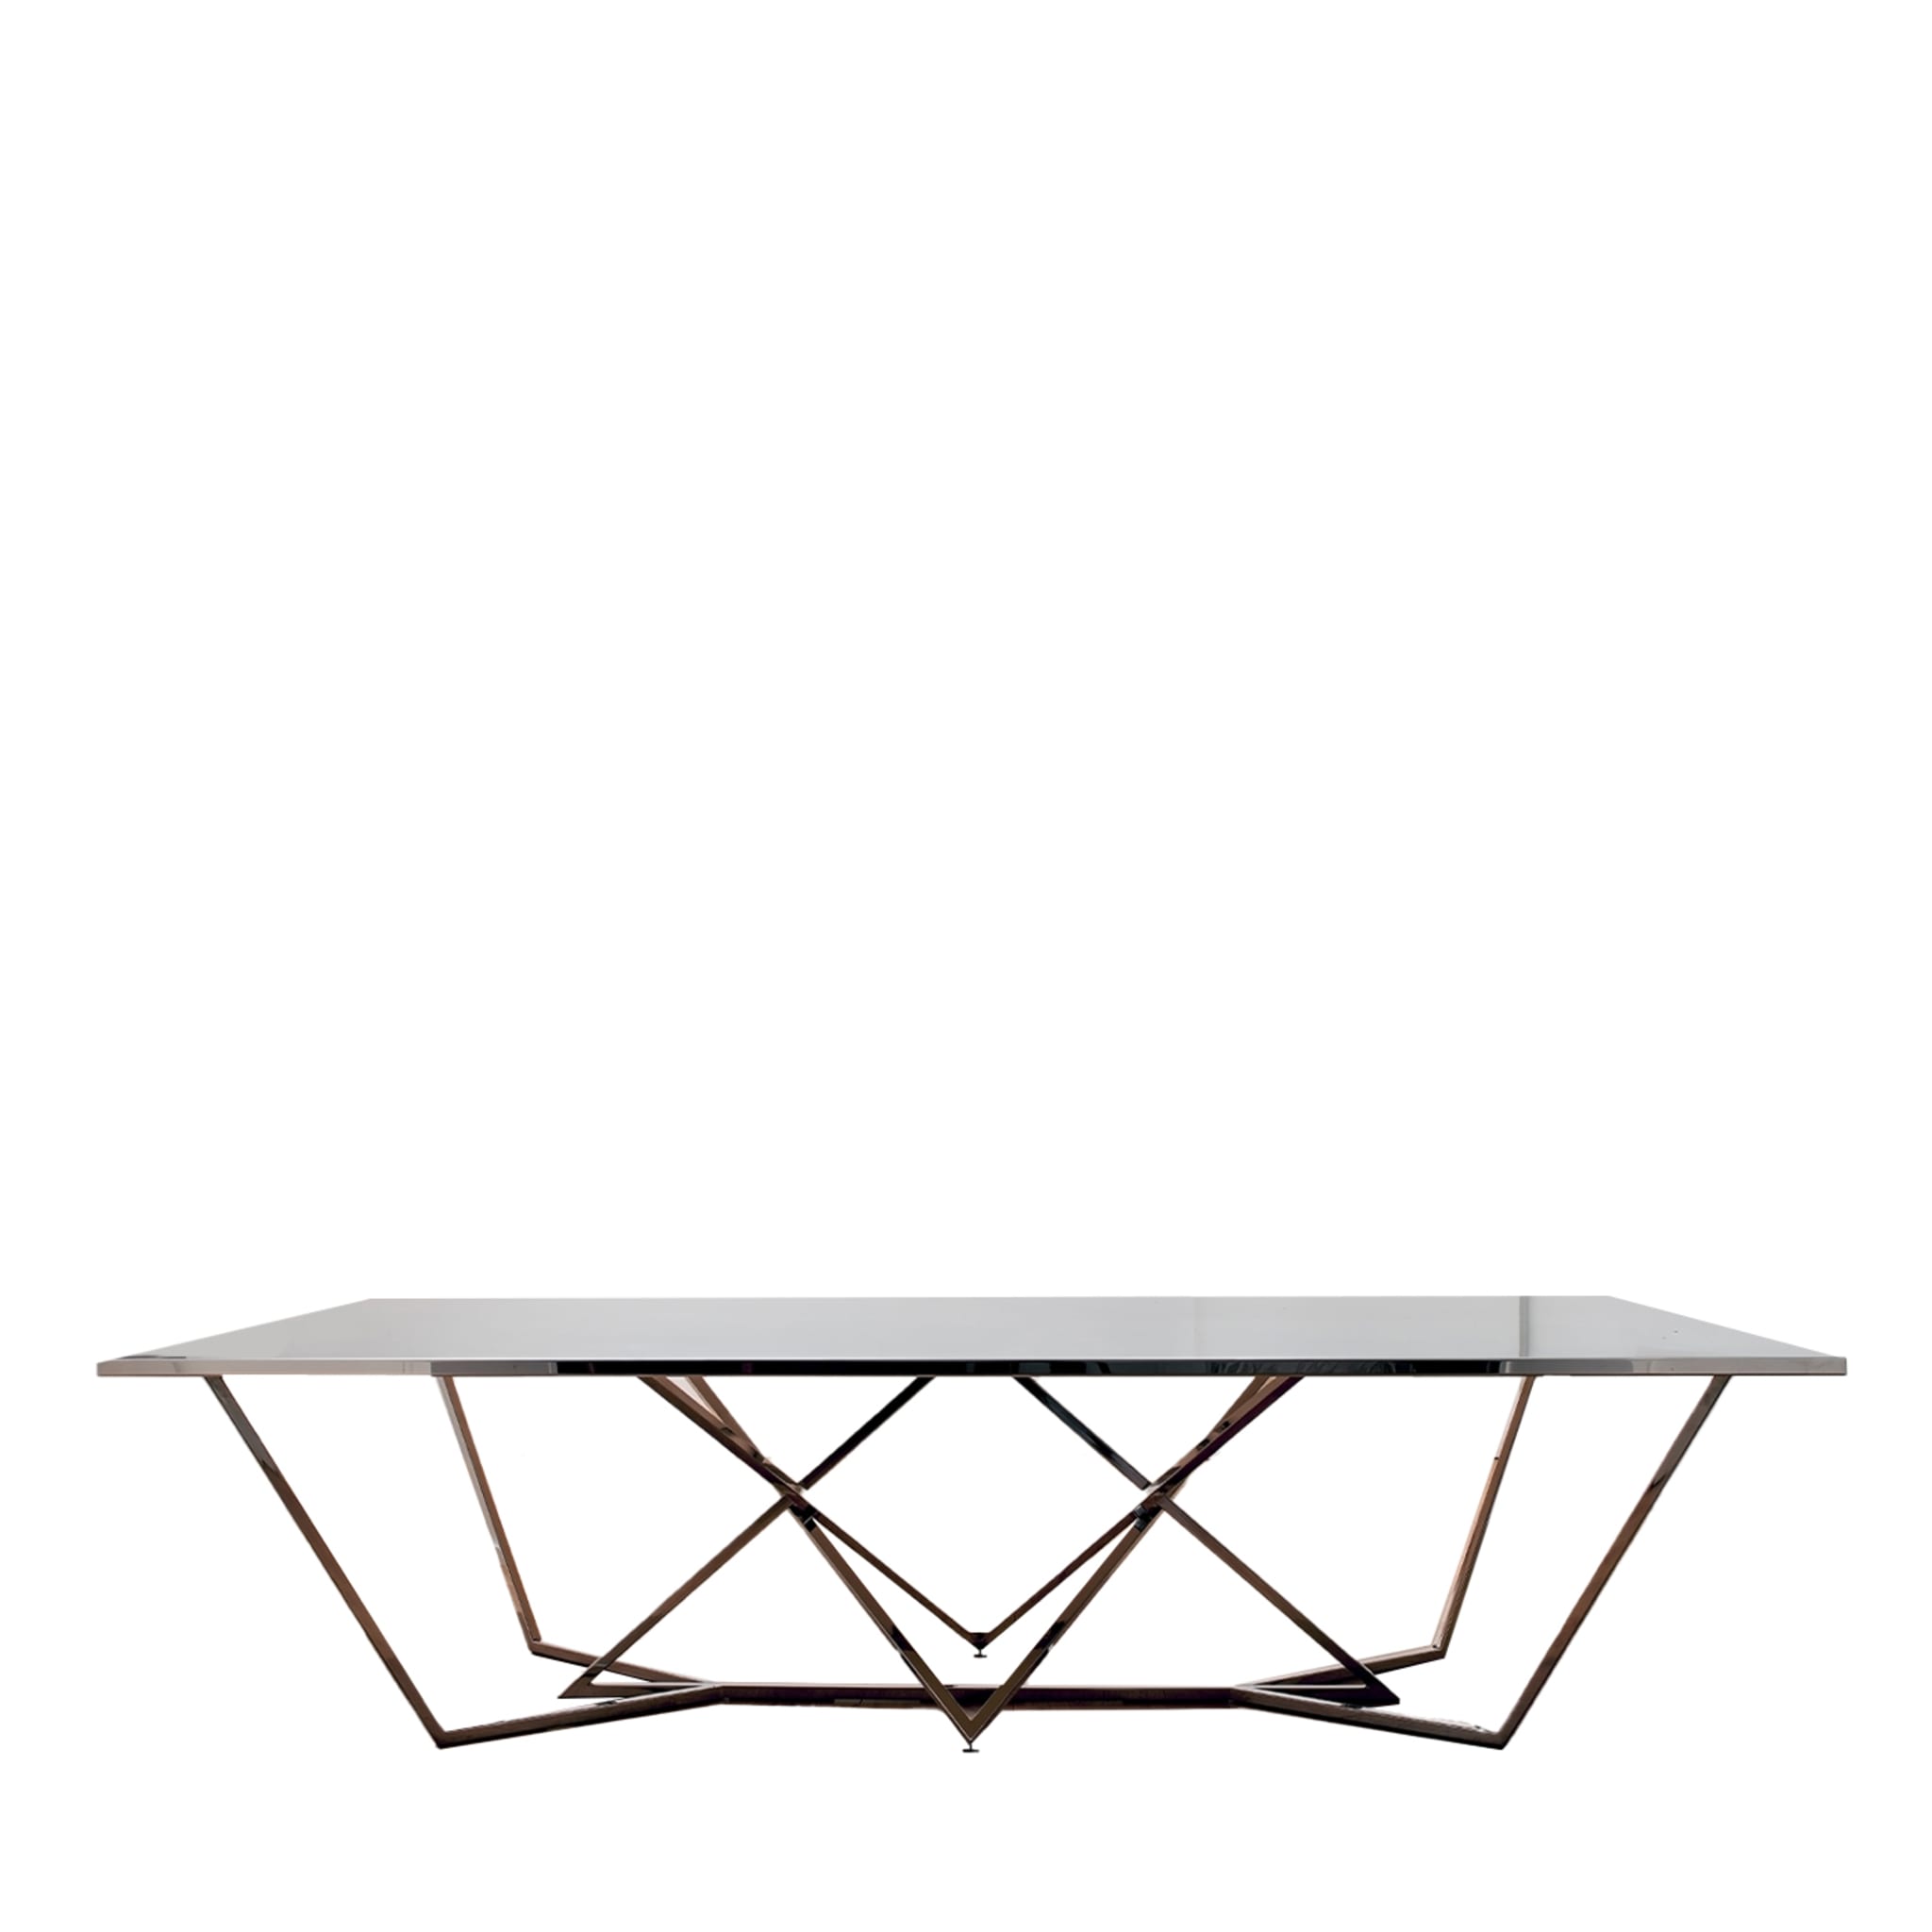 Aracnide Table by Michele Iodice - Main view